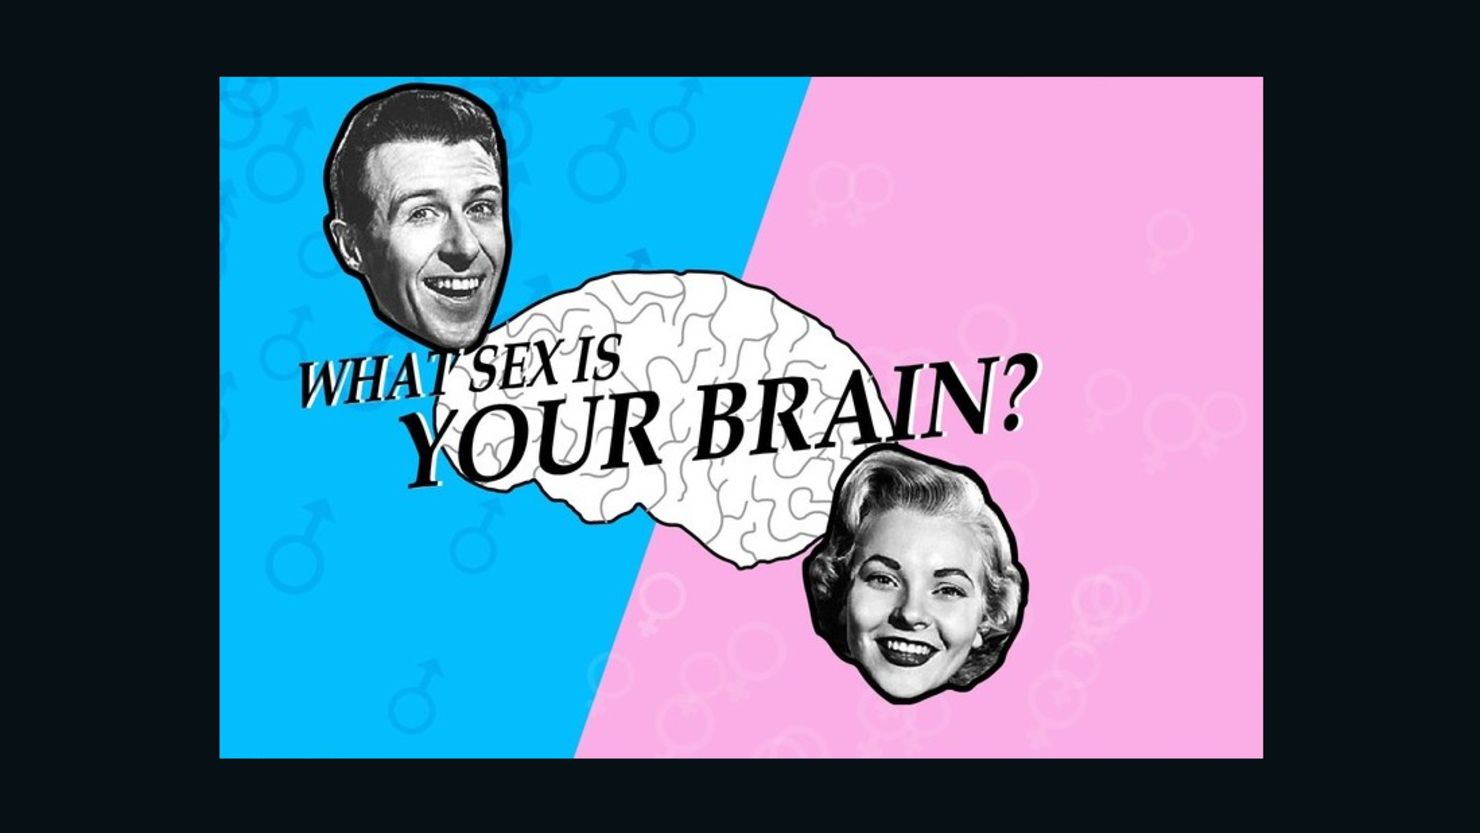 The opening page of the brain gender quiz